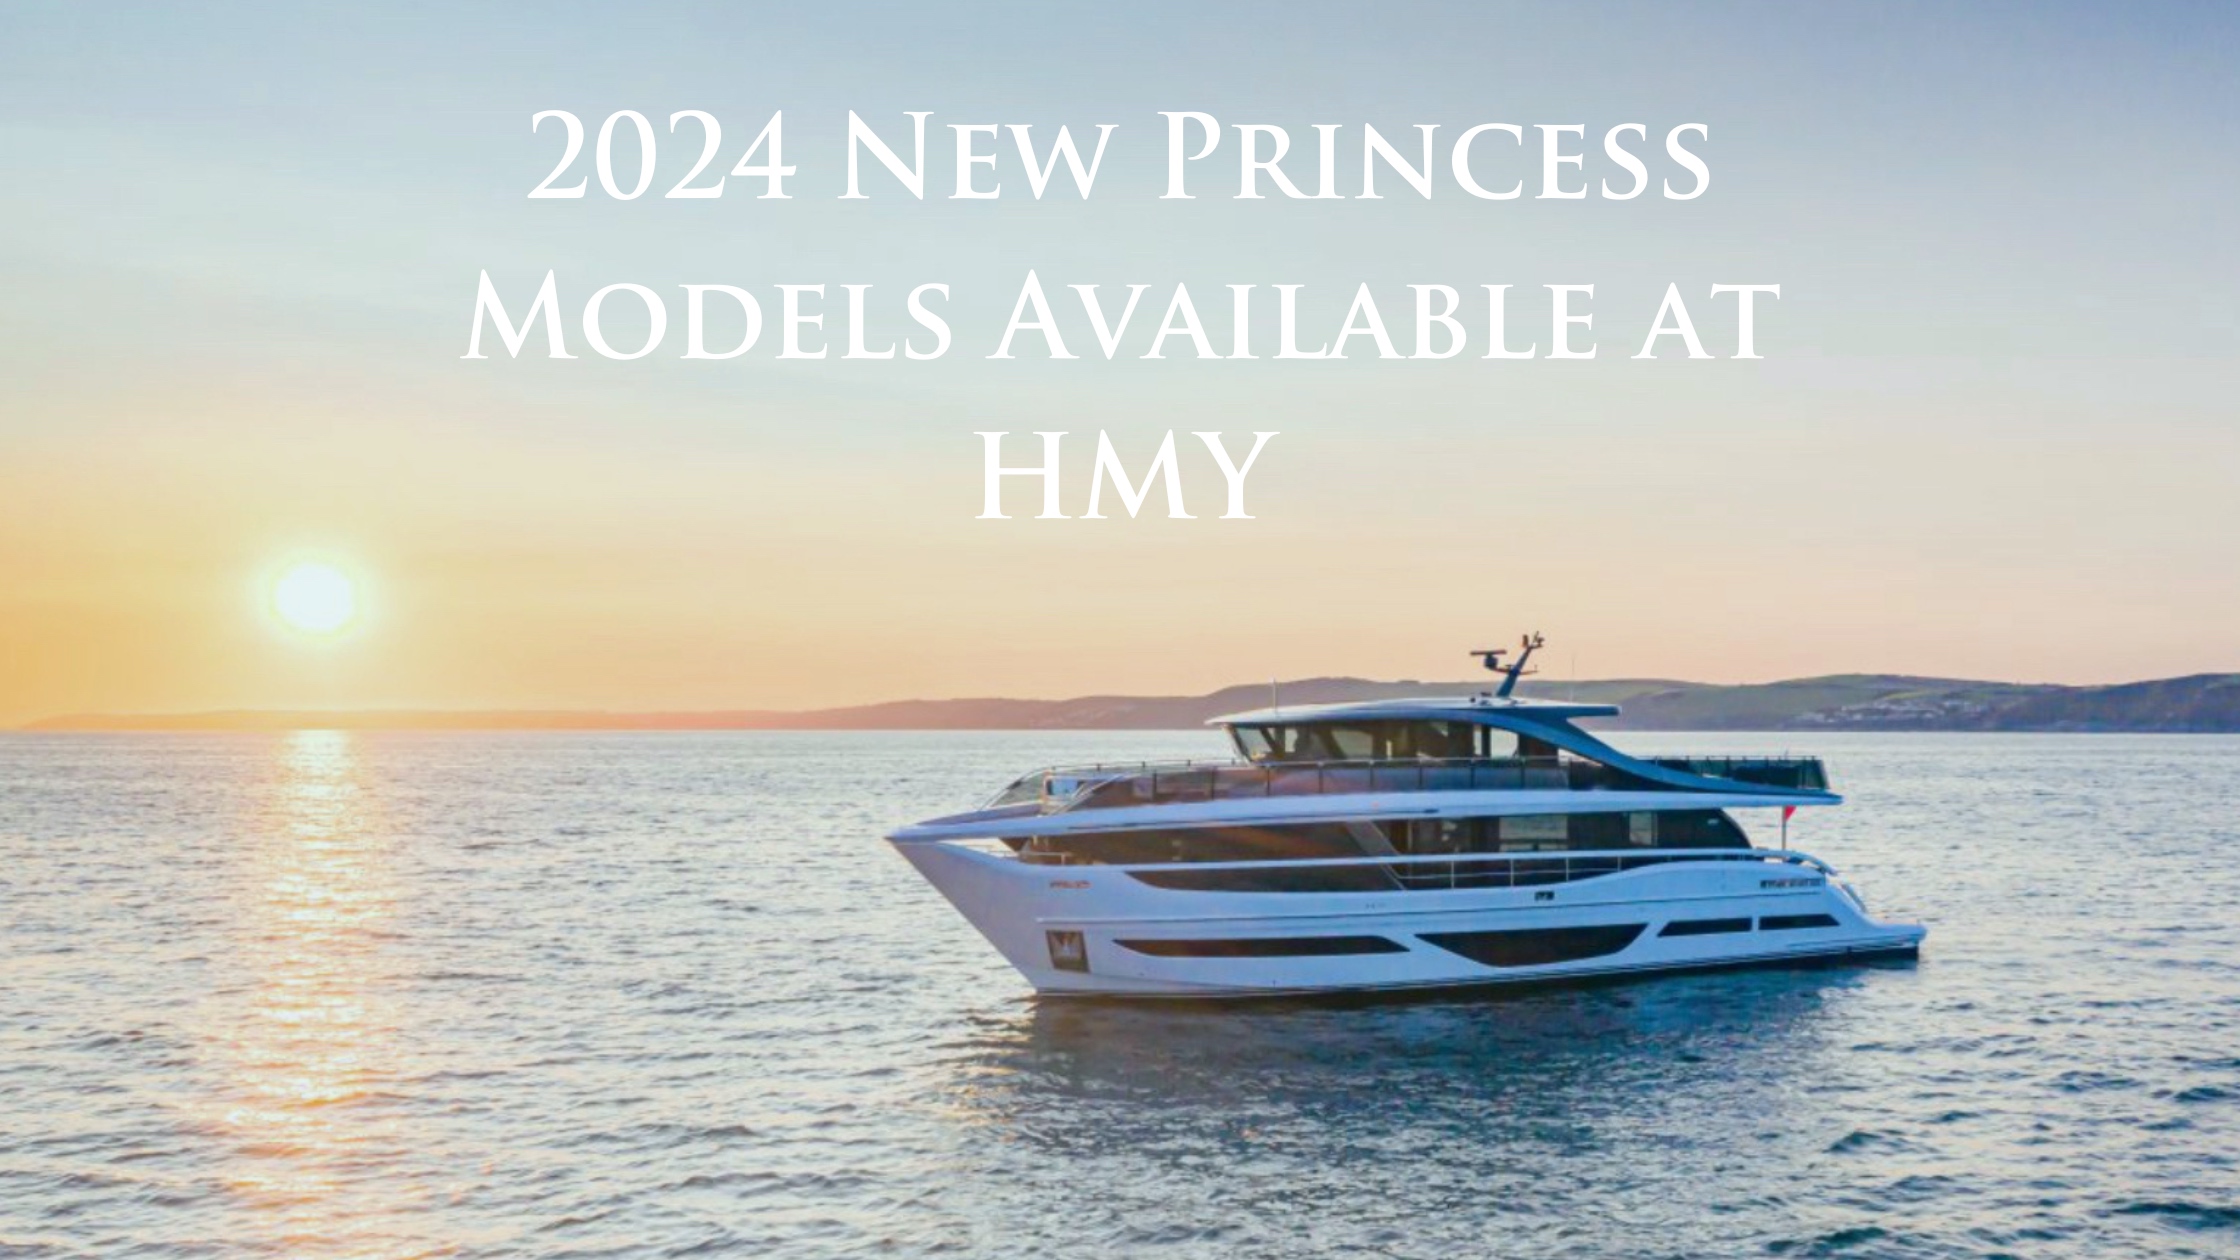 6 Featured Princess Yachts Models Available in 2024 Through HMY